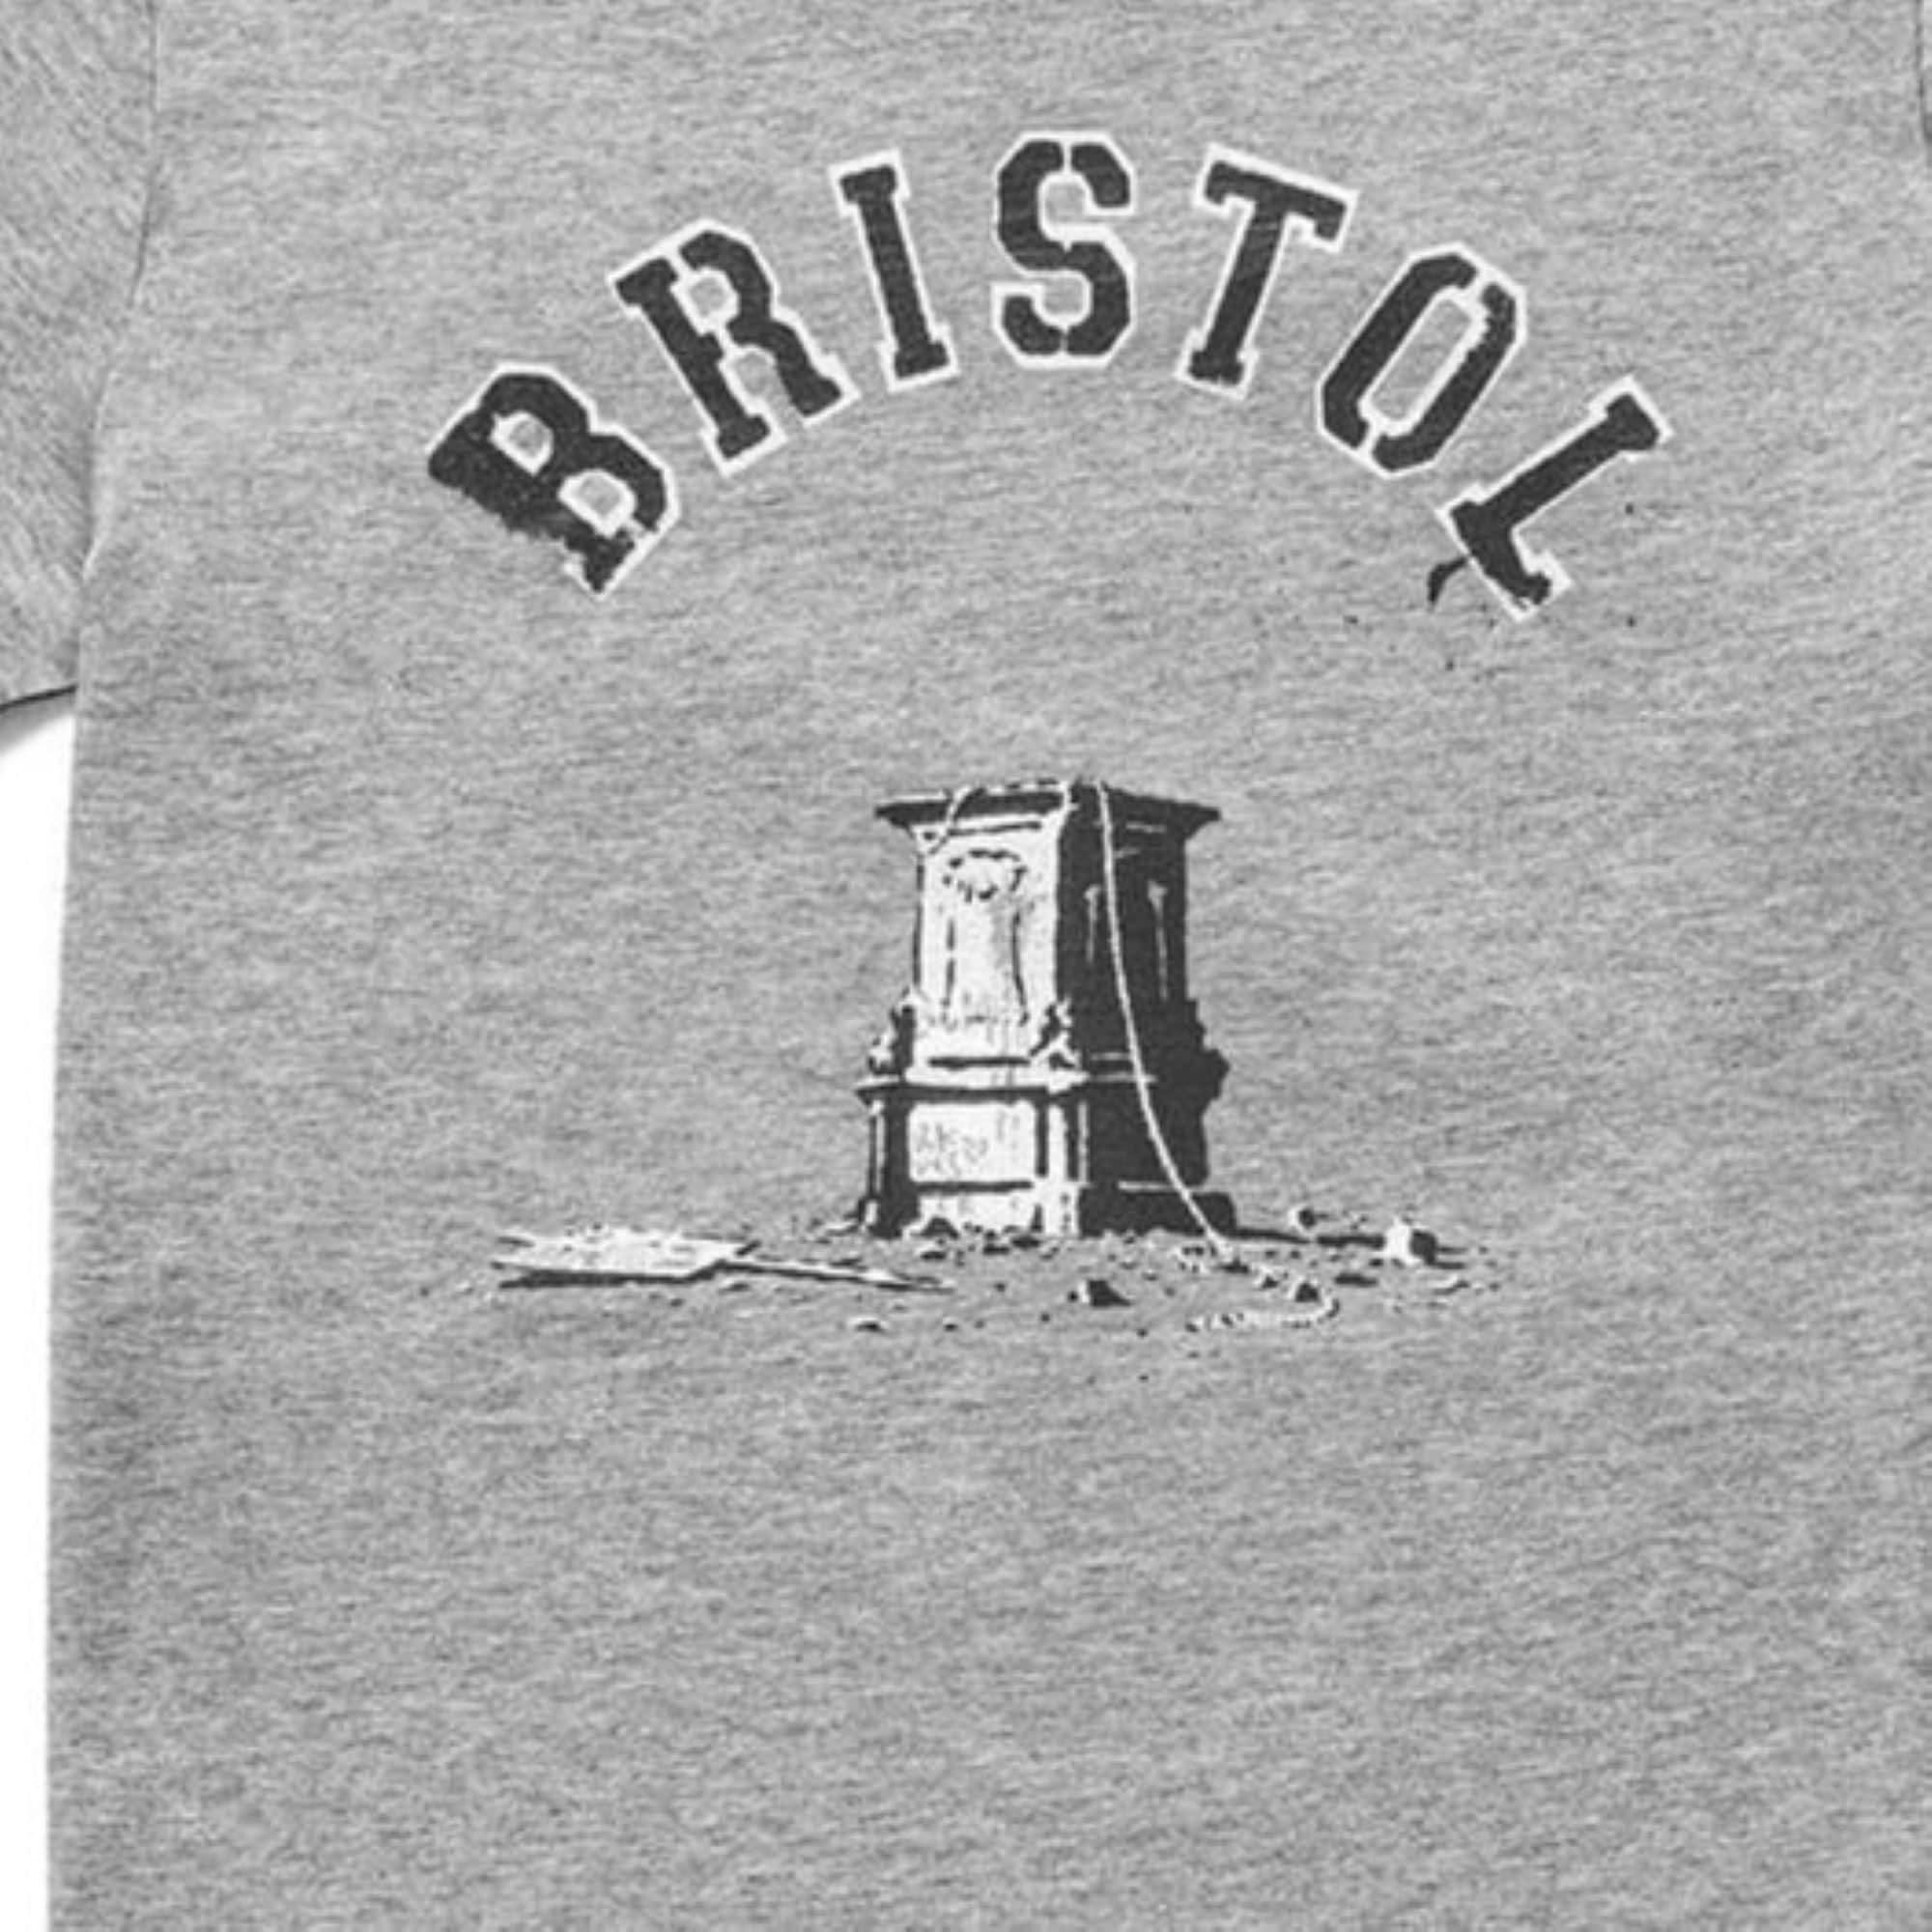 Banksy Bristol t shirt supports 'Colston Four' 8Ball